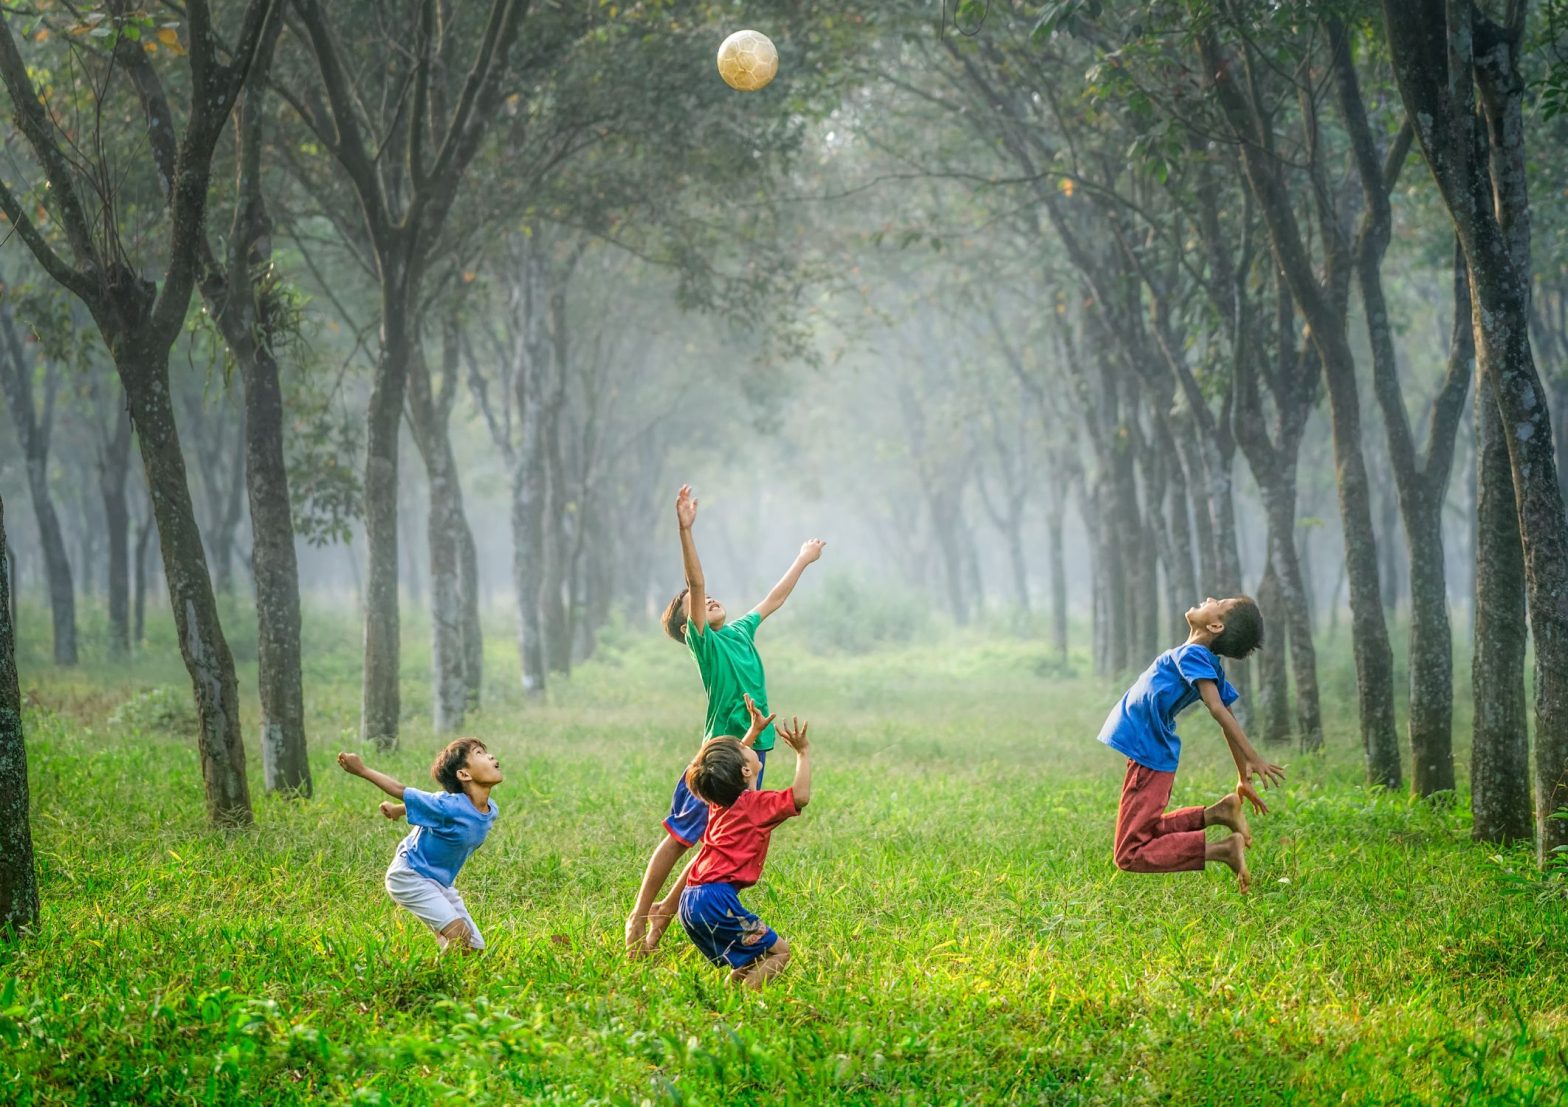 Image shows young children filled with joy and excitement jumping and playing in the woods